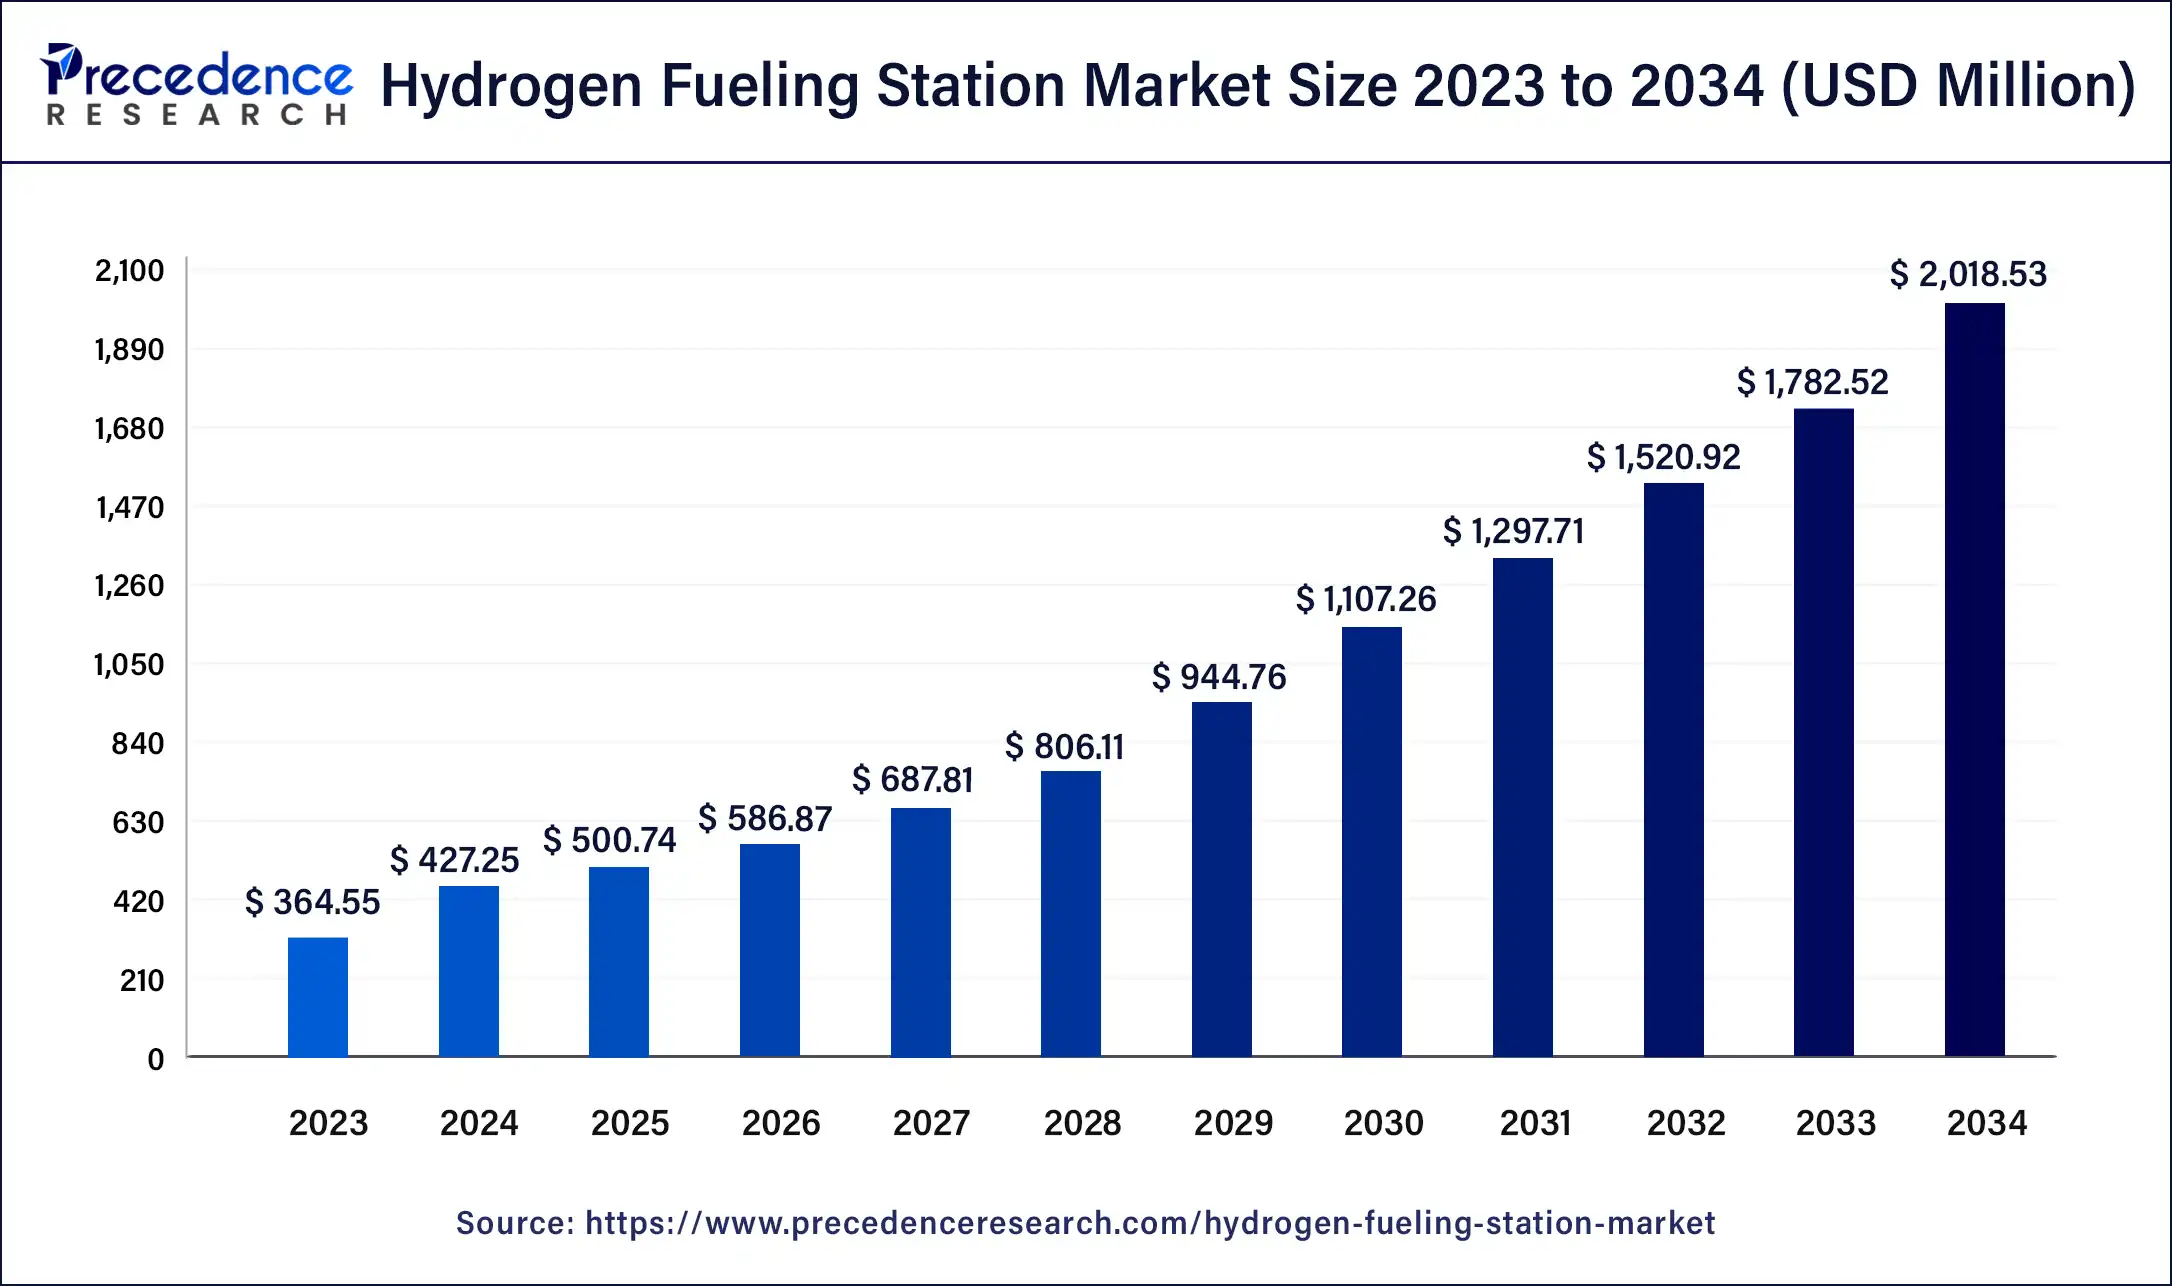 Hydrogen Fueling Stations Market Size 2024 to 2034